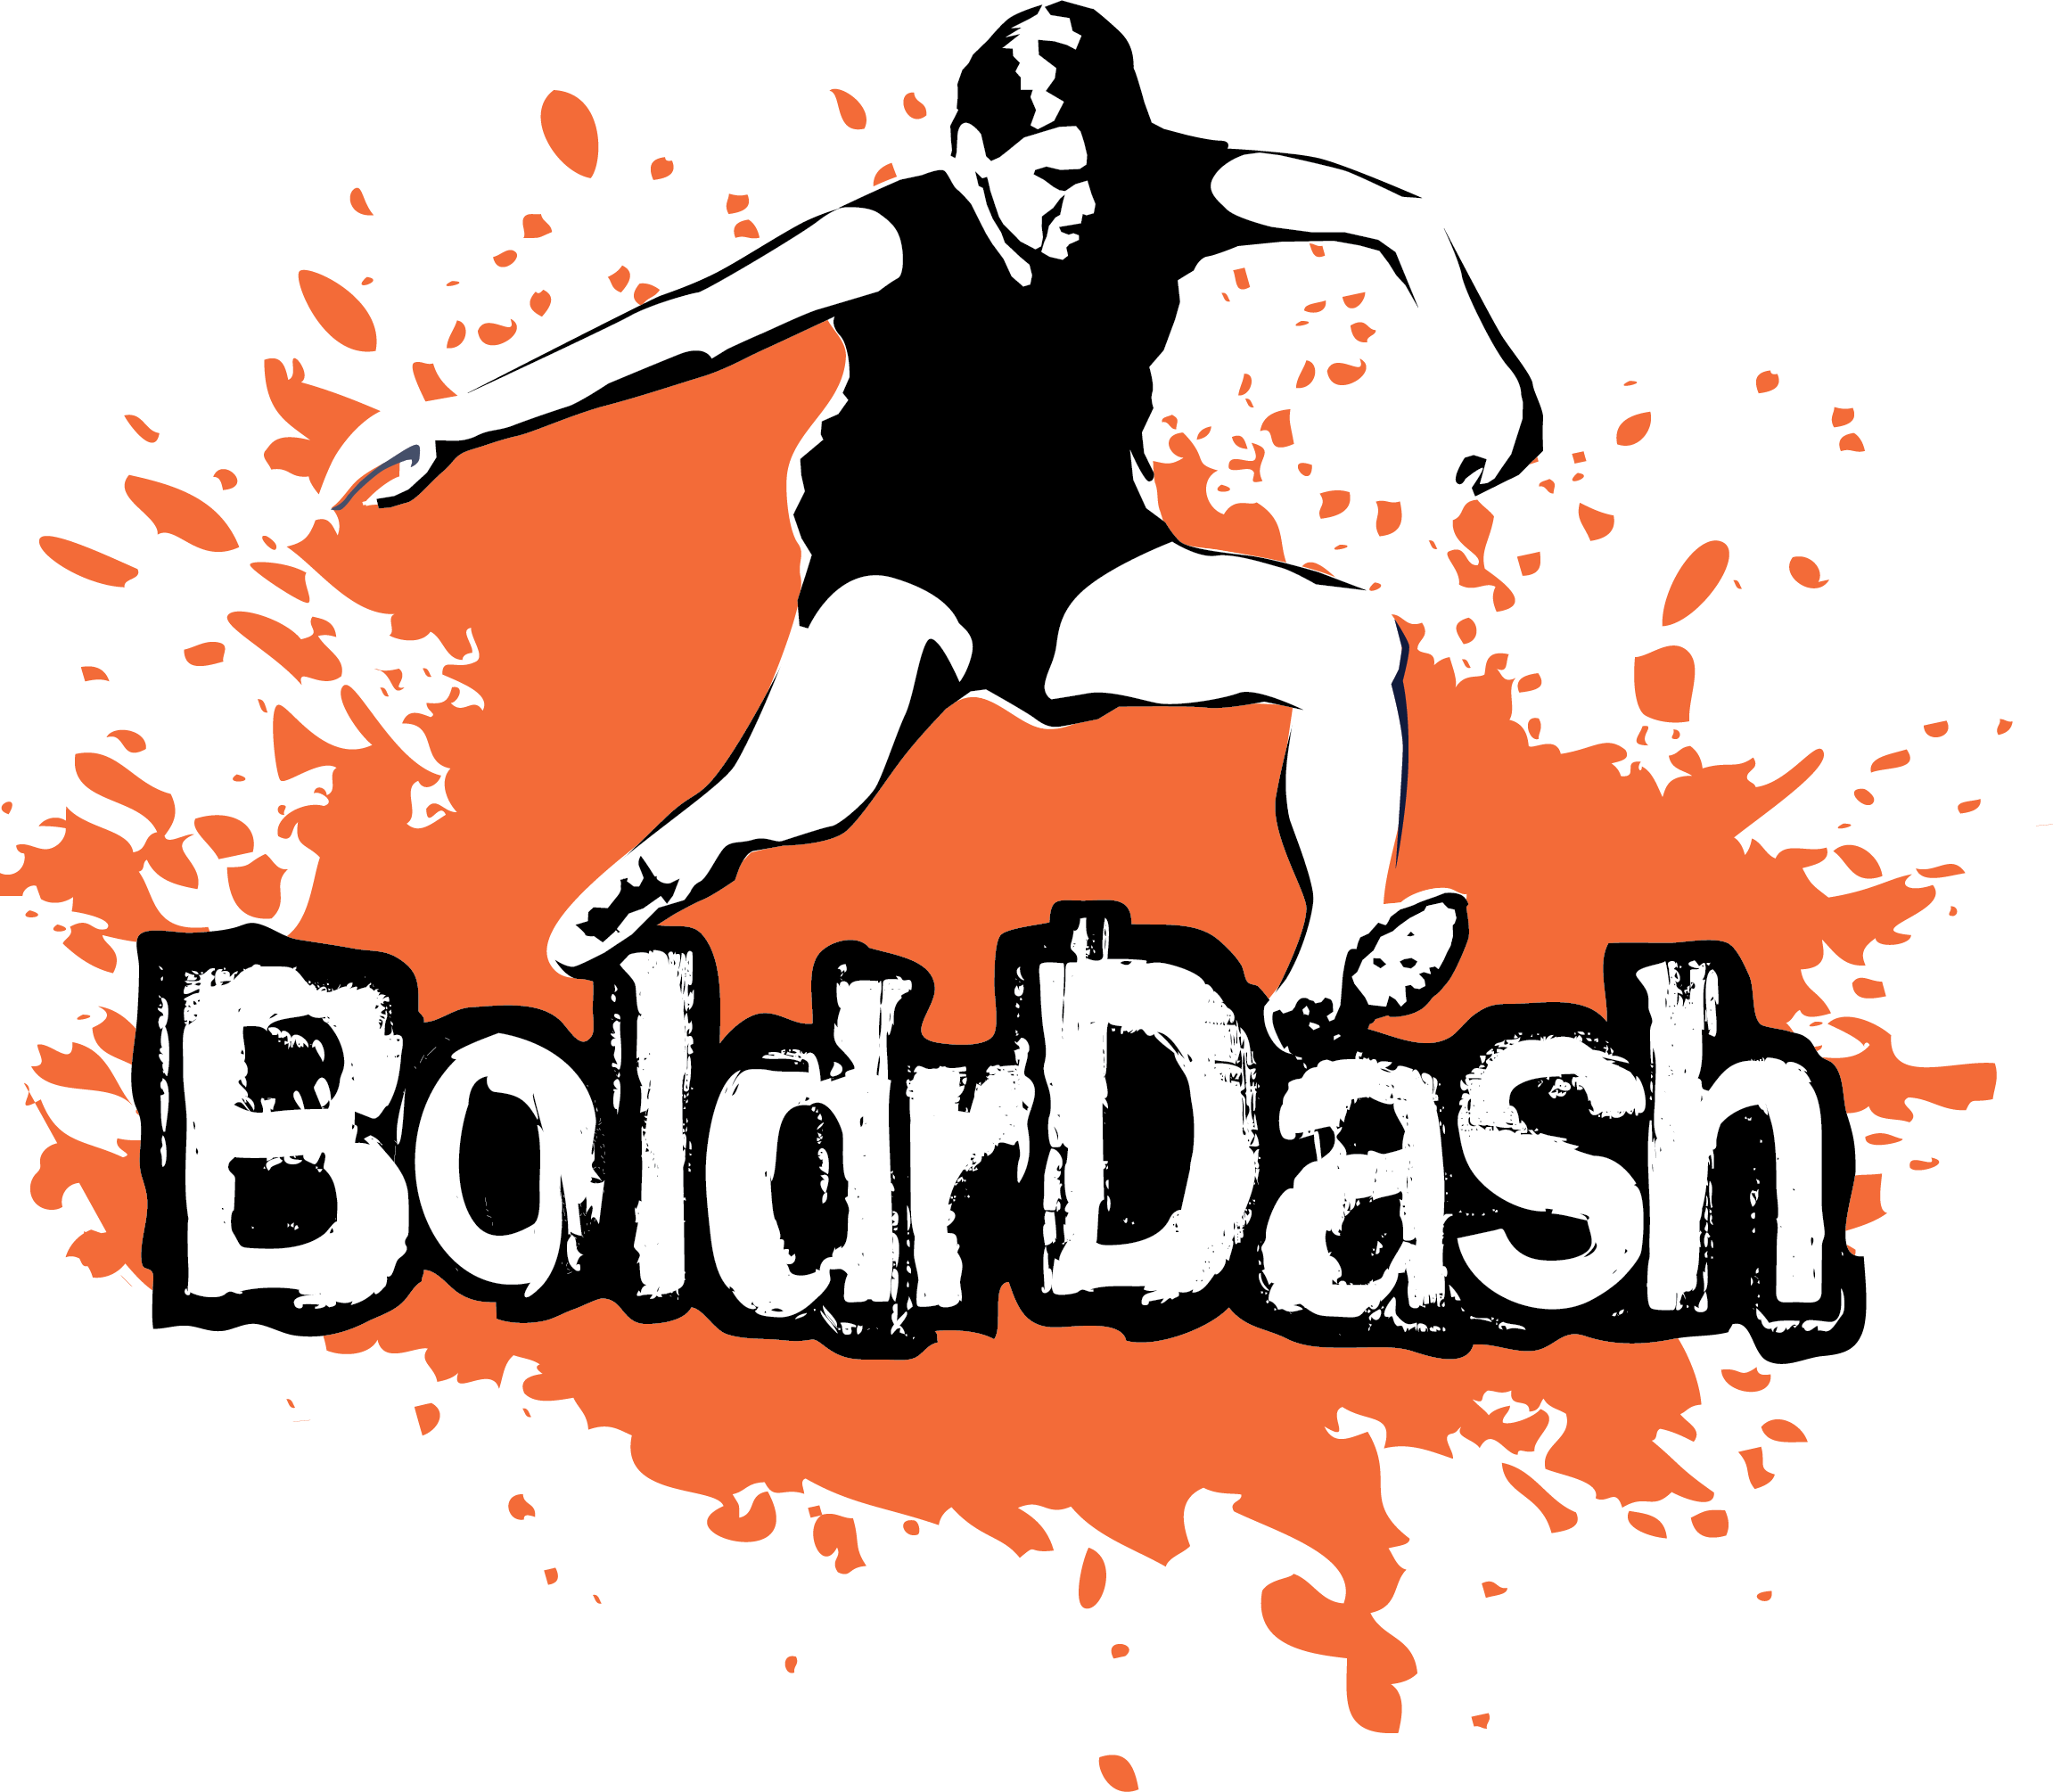 Bold R Dash - Obstacle Racing (2303x2010)